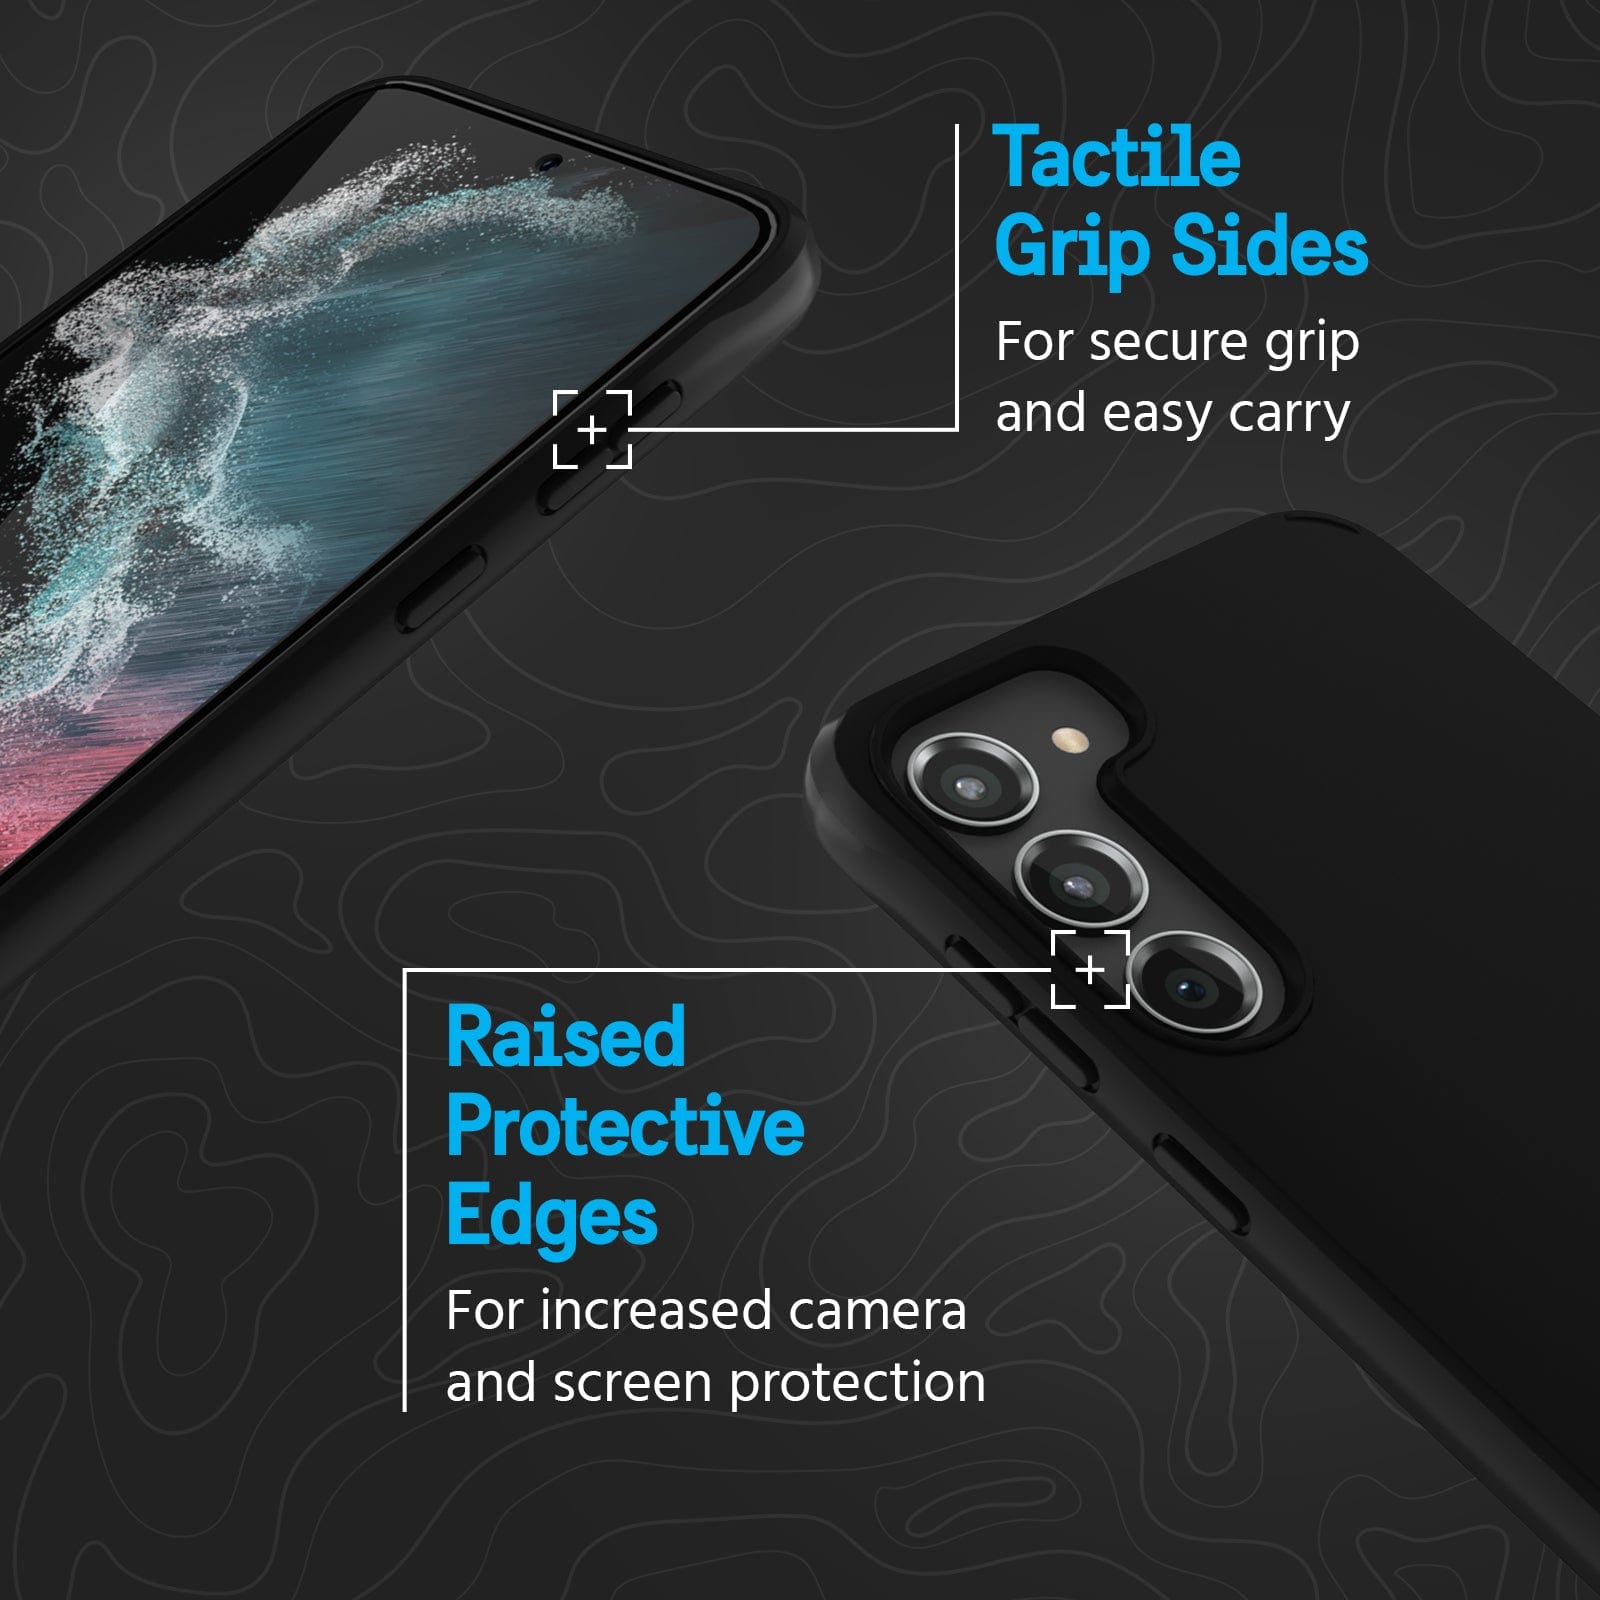 TACTILE GRIP SIDES. FOR SECURE GRIP AND EASY CARRY. RAISED PROTECTIVE EDGES FOR INCREASED CAMERA AND SCREEN PROTECTION